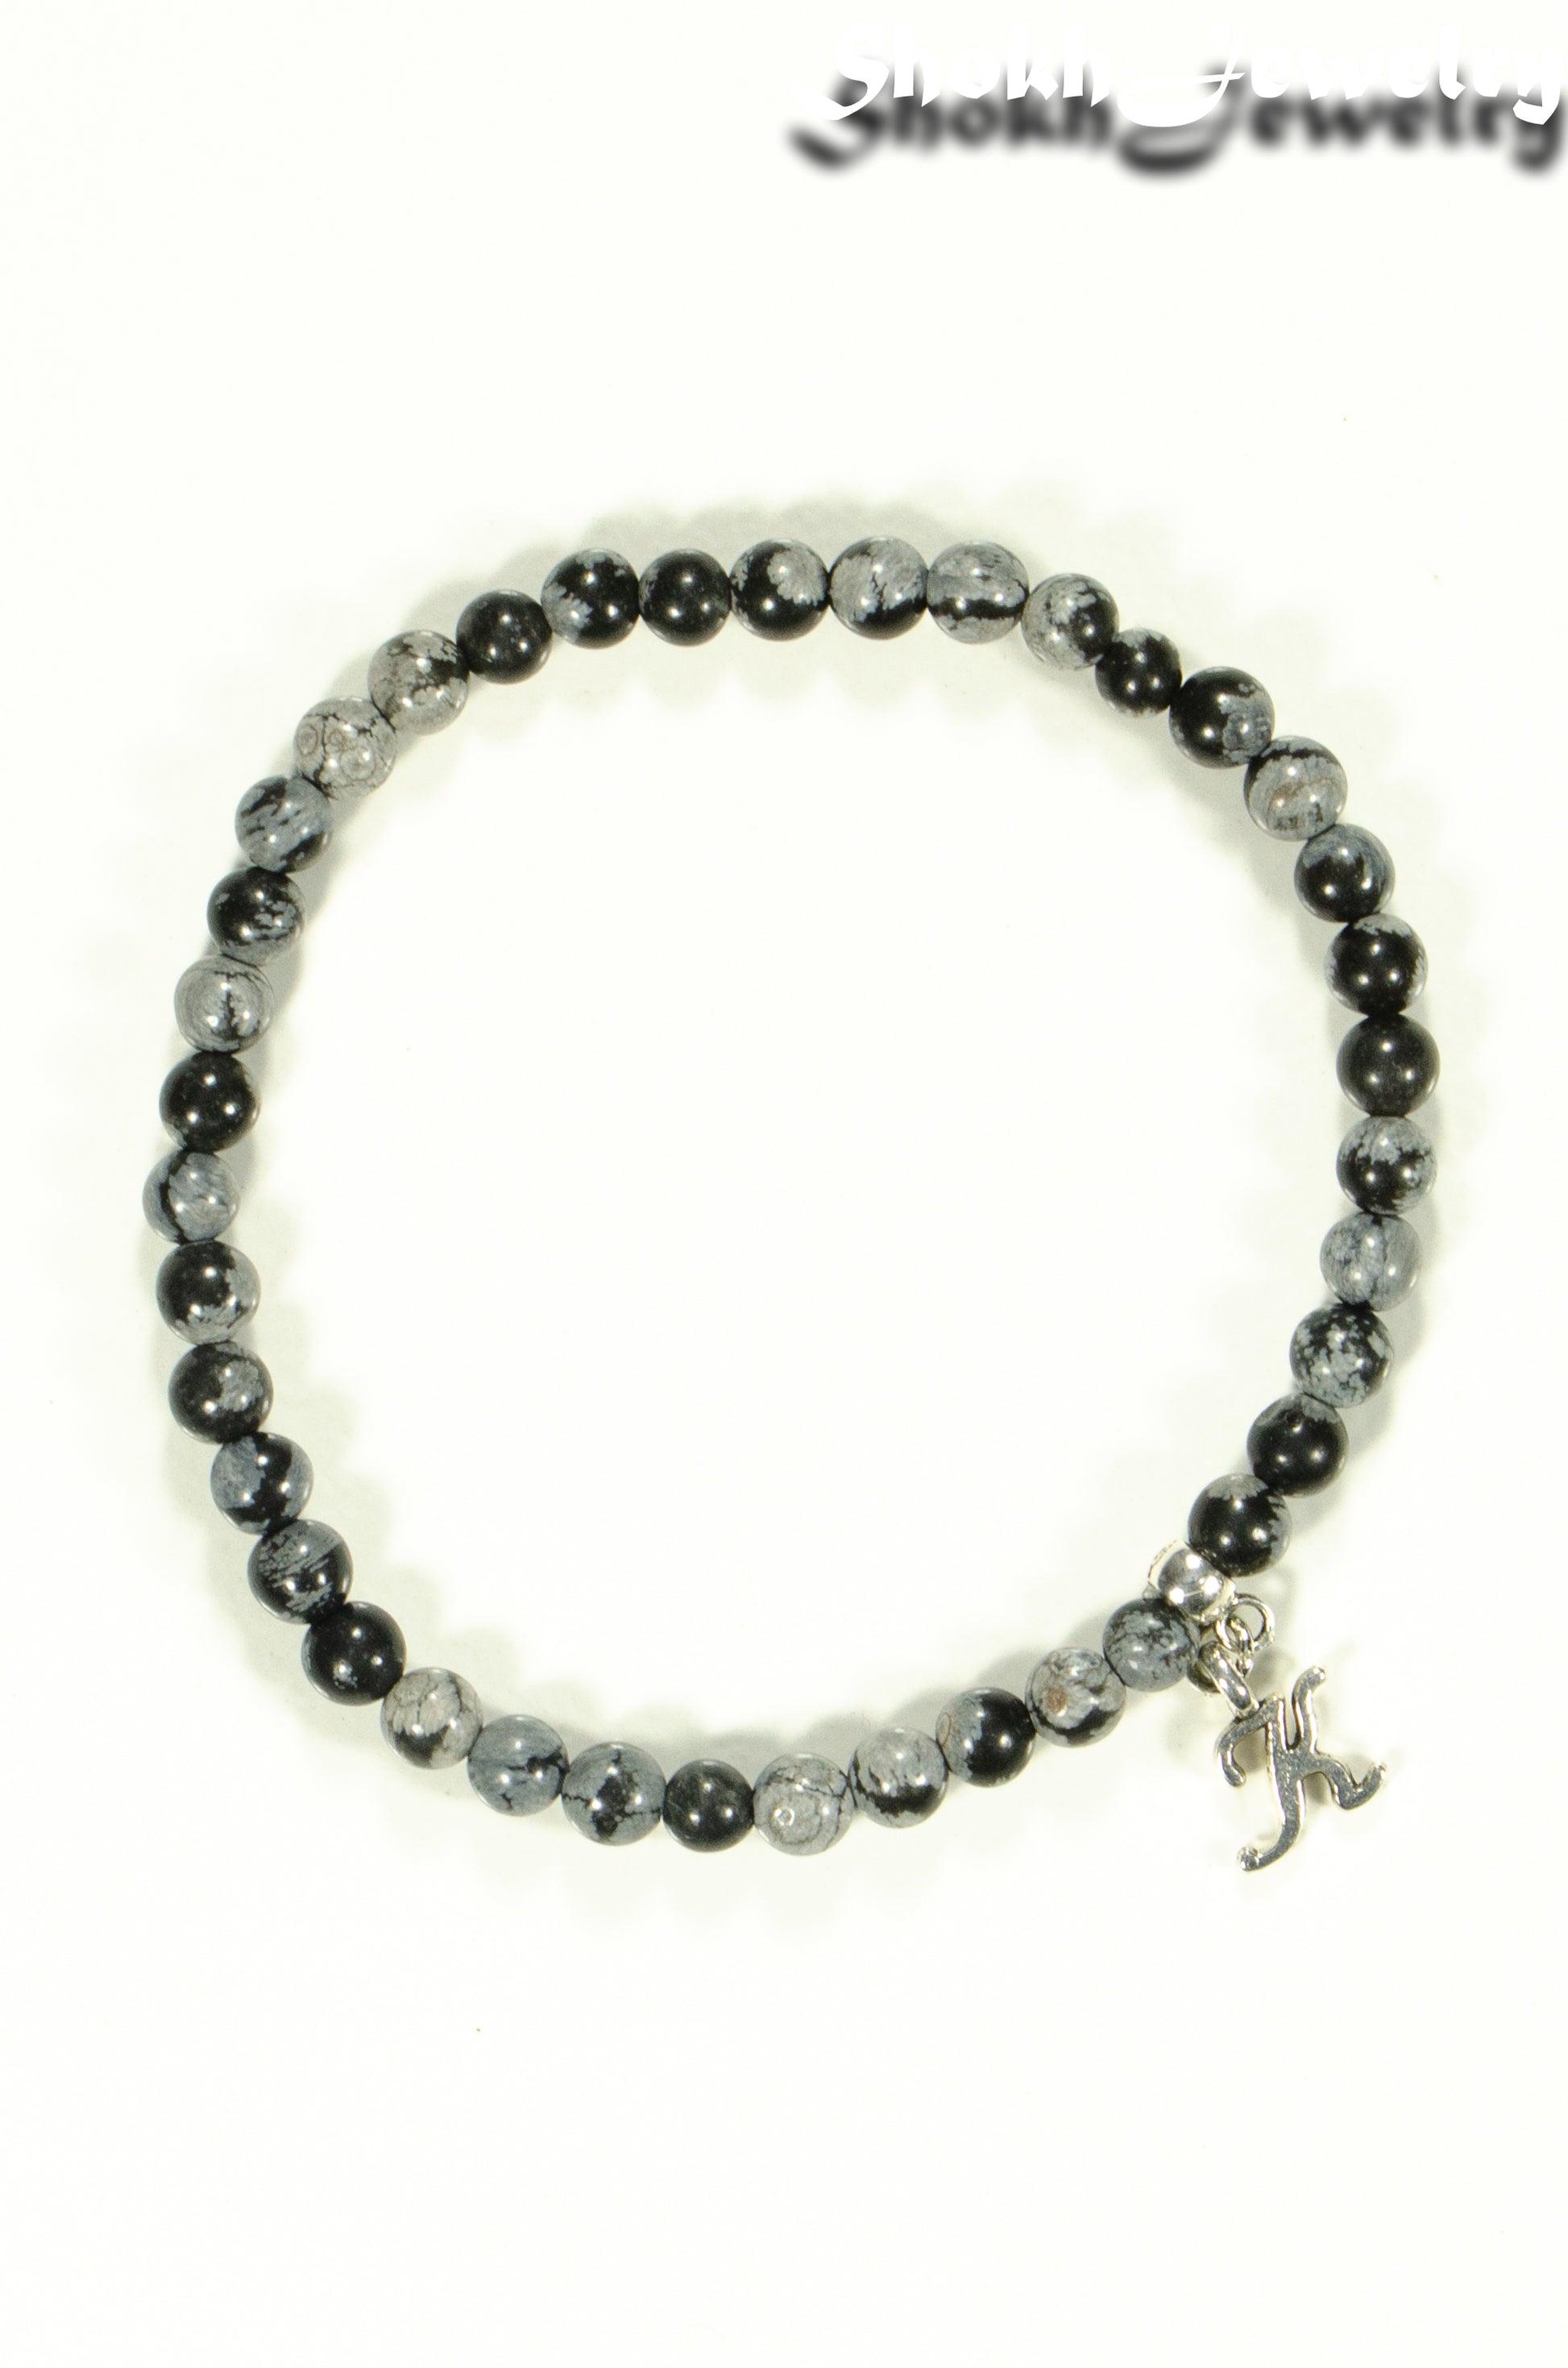 Top view of 4mm Snowflake Obsidian Bracelet with Initial.